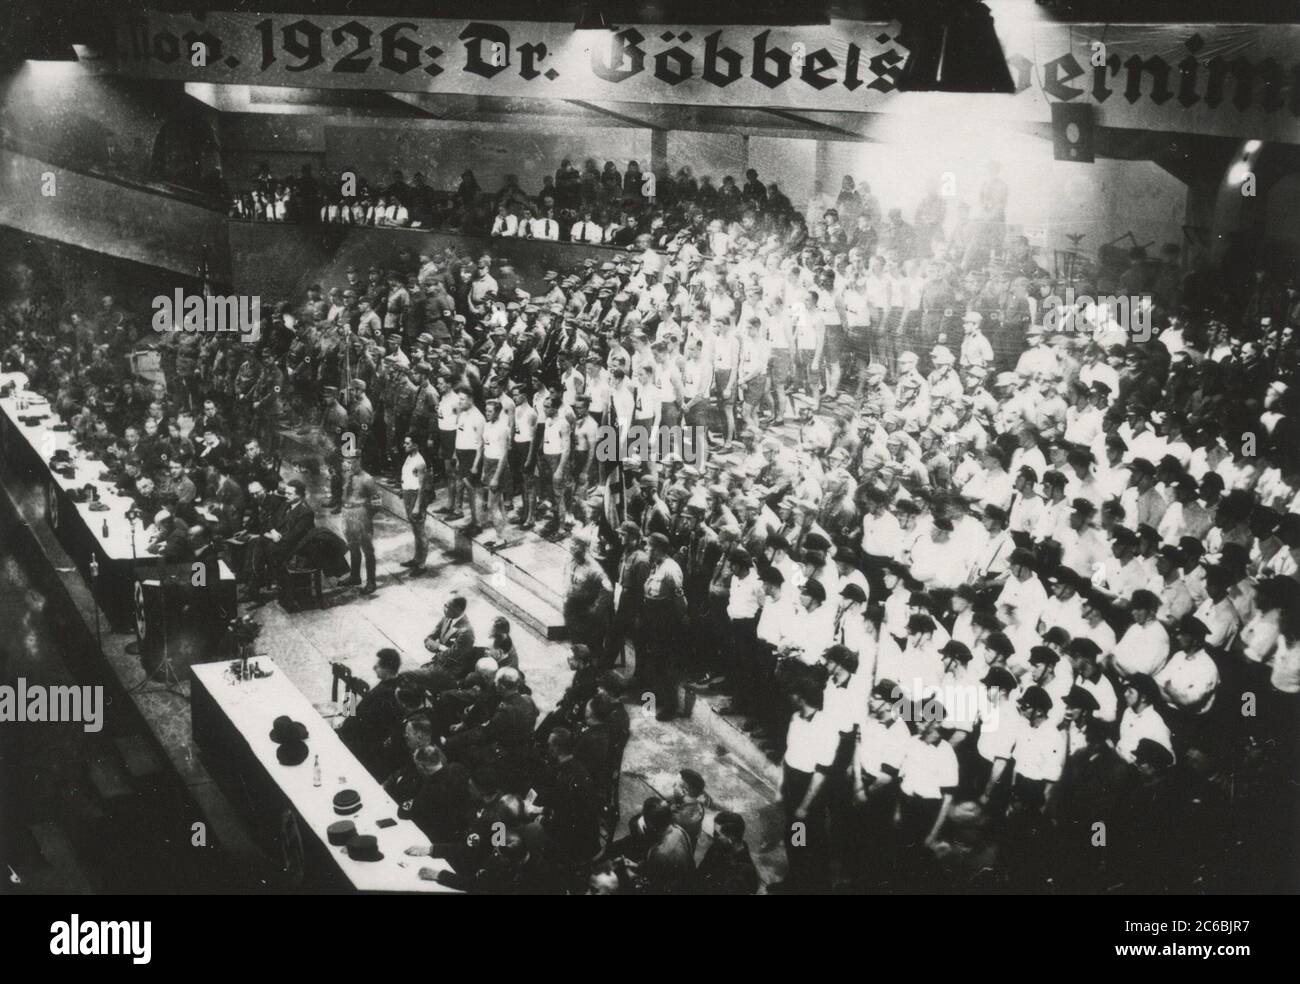 Rally in the Berlin Sportpalast - Goebbels, Goerlitzer, Hanke, Heinrich Hoffmann Photographs 1934 Adolf Hitler's official photographer, and a Nazi politician and publisher, who was a member of Hitler's intimate circle. Stock Photo